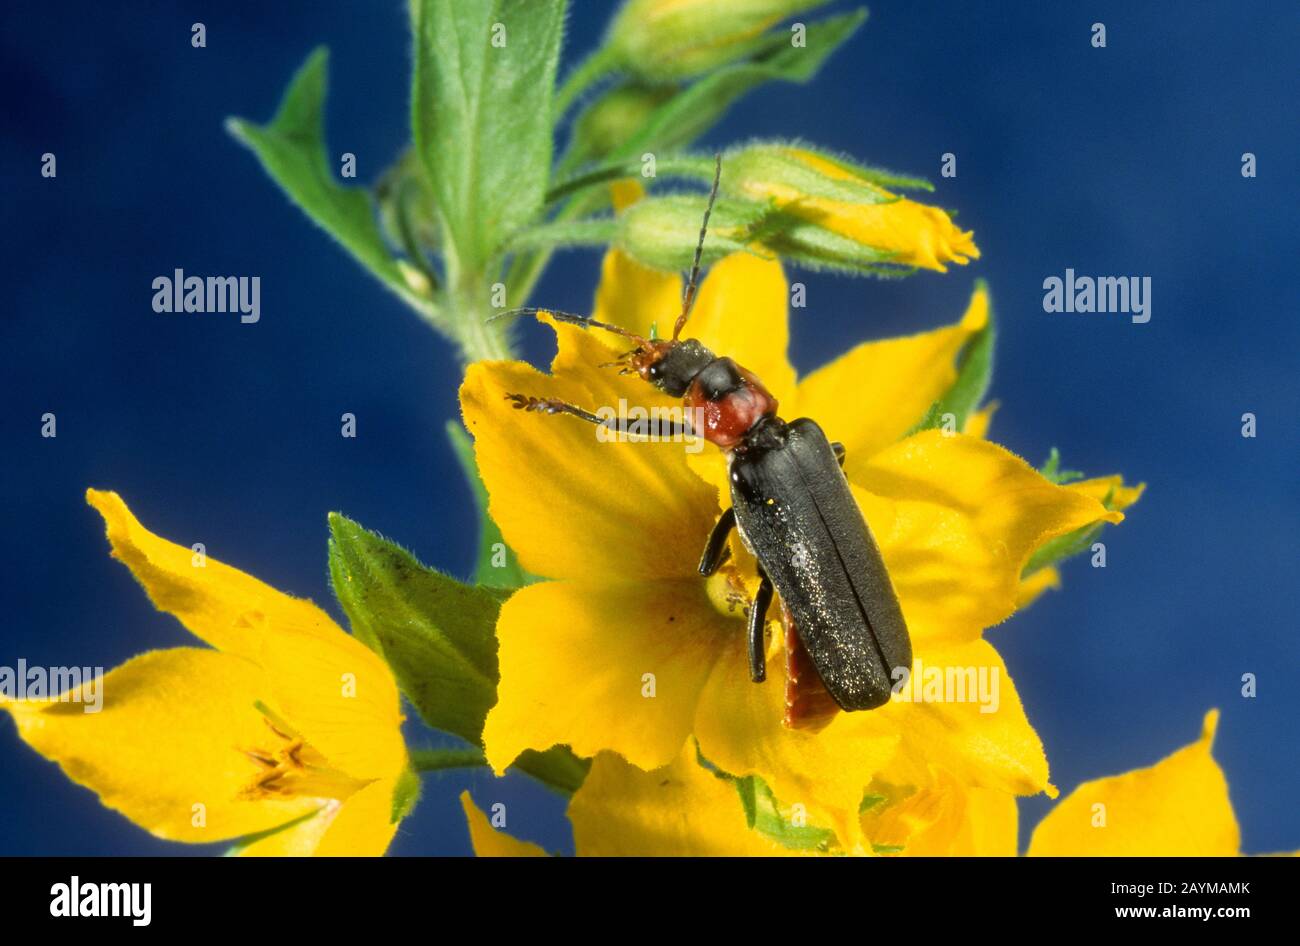 common cantharid, common soldier beetle (Cantharis fusca), on a yellow flower, Germany Stock Photo